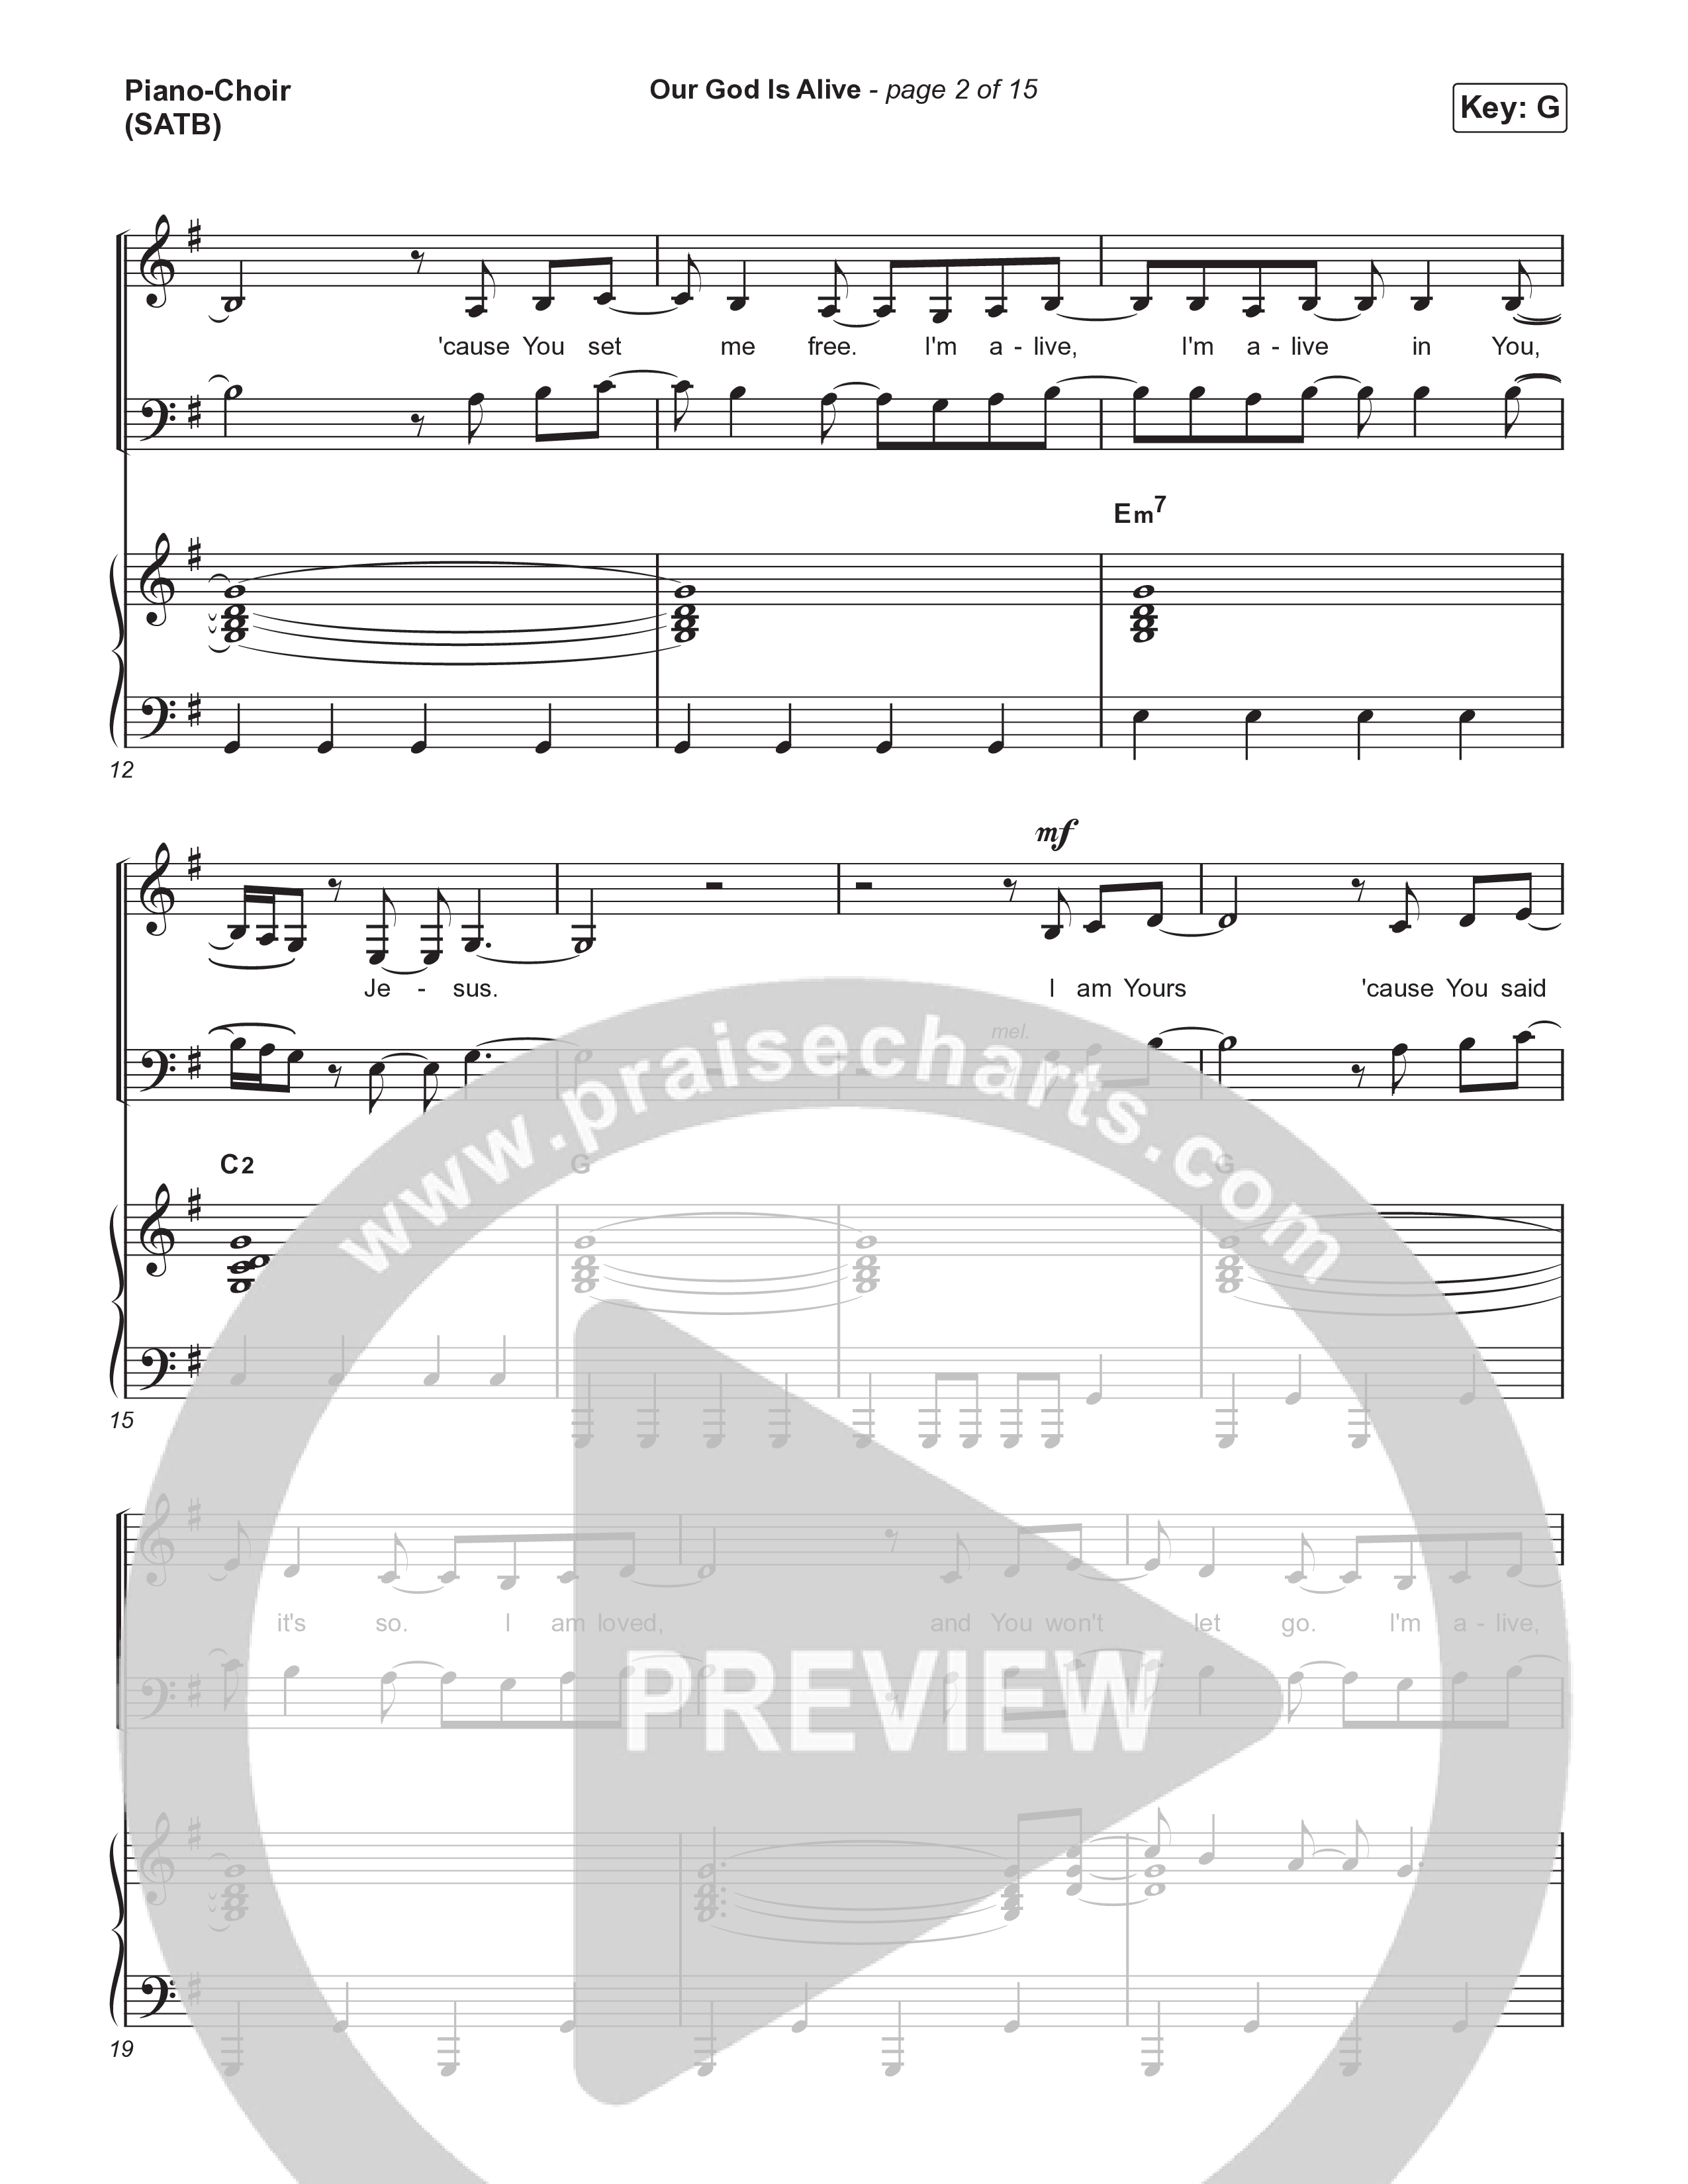 Our God Is Alive Piano/Vocal (SATB) (Austin Stone Worship)